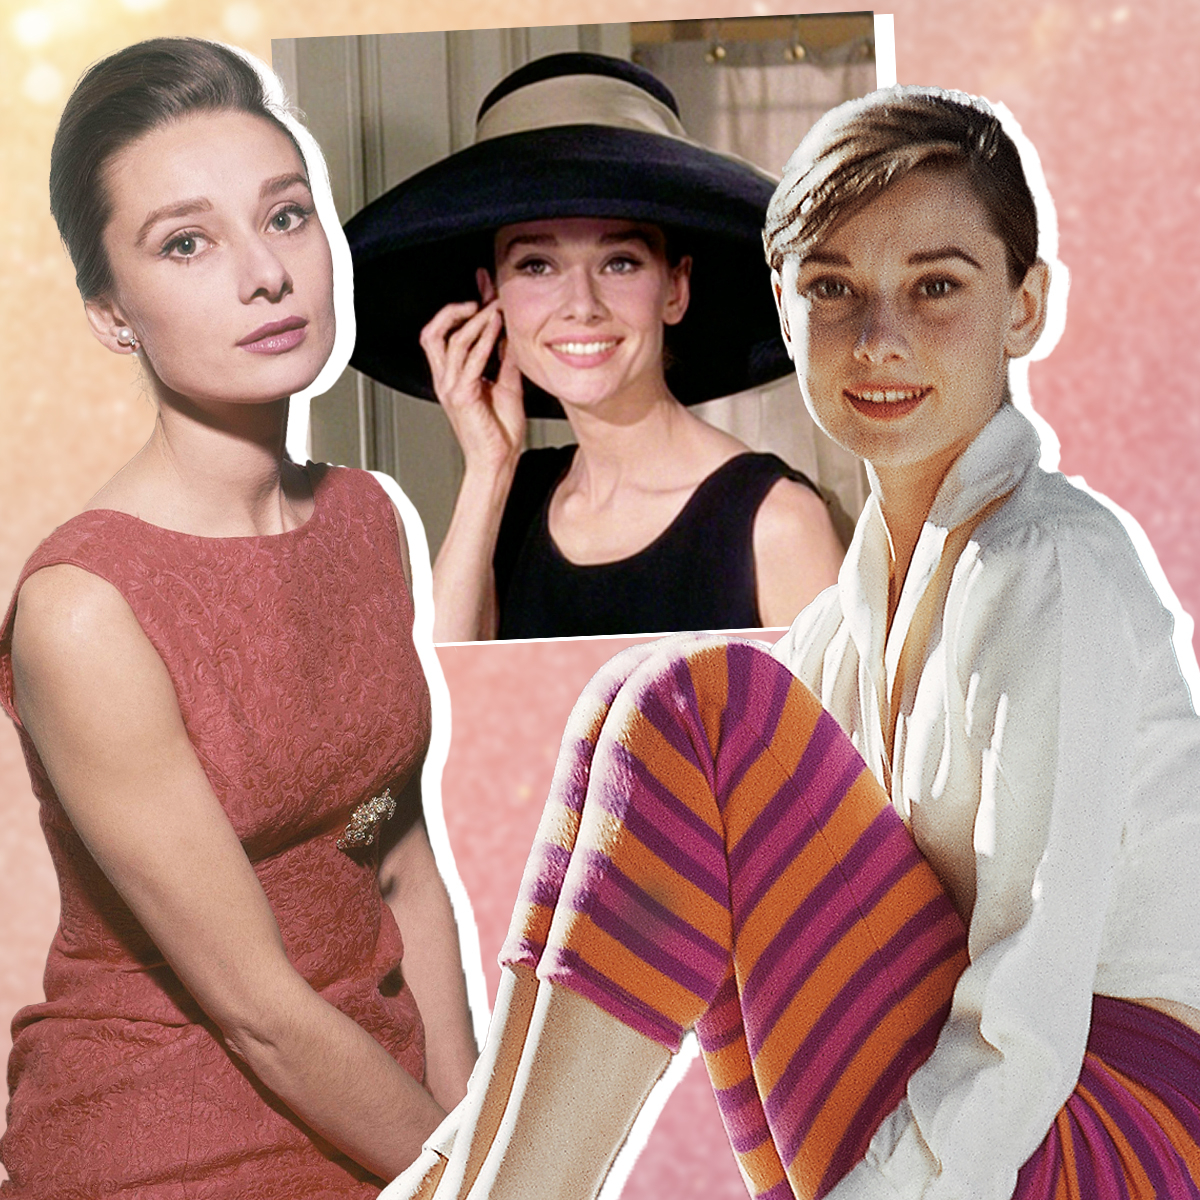 Channel Audrey Hepburn With This Beauty Breakdown of Her Signature Glam